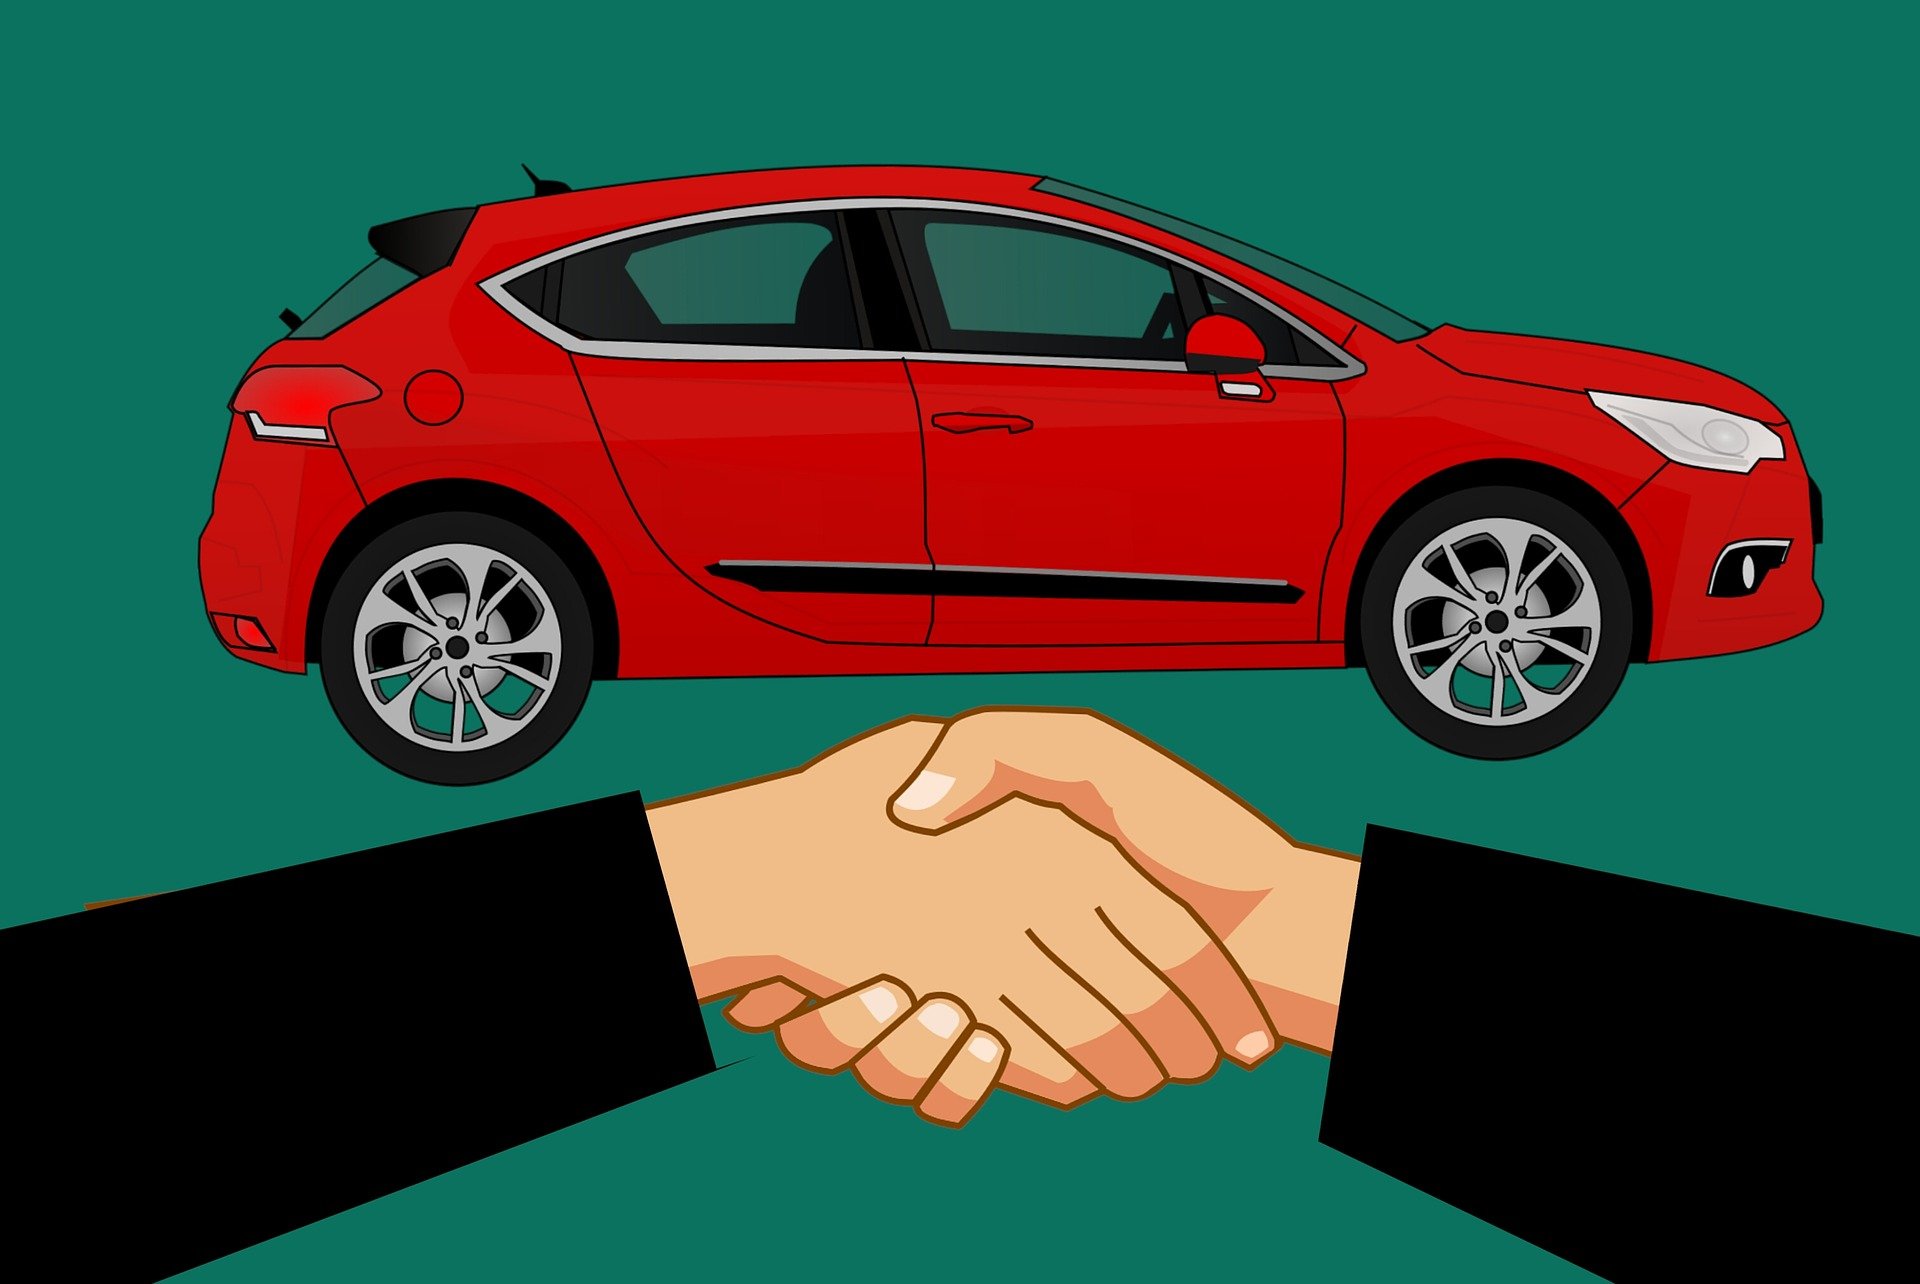 Cash For Cars - How Much Should Your Car Selling Price Be?